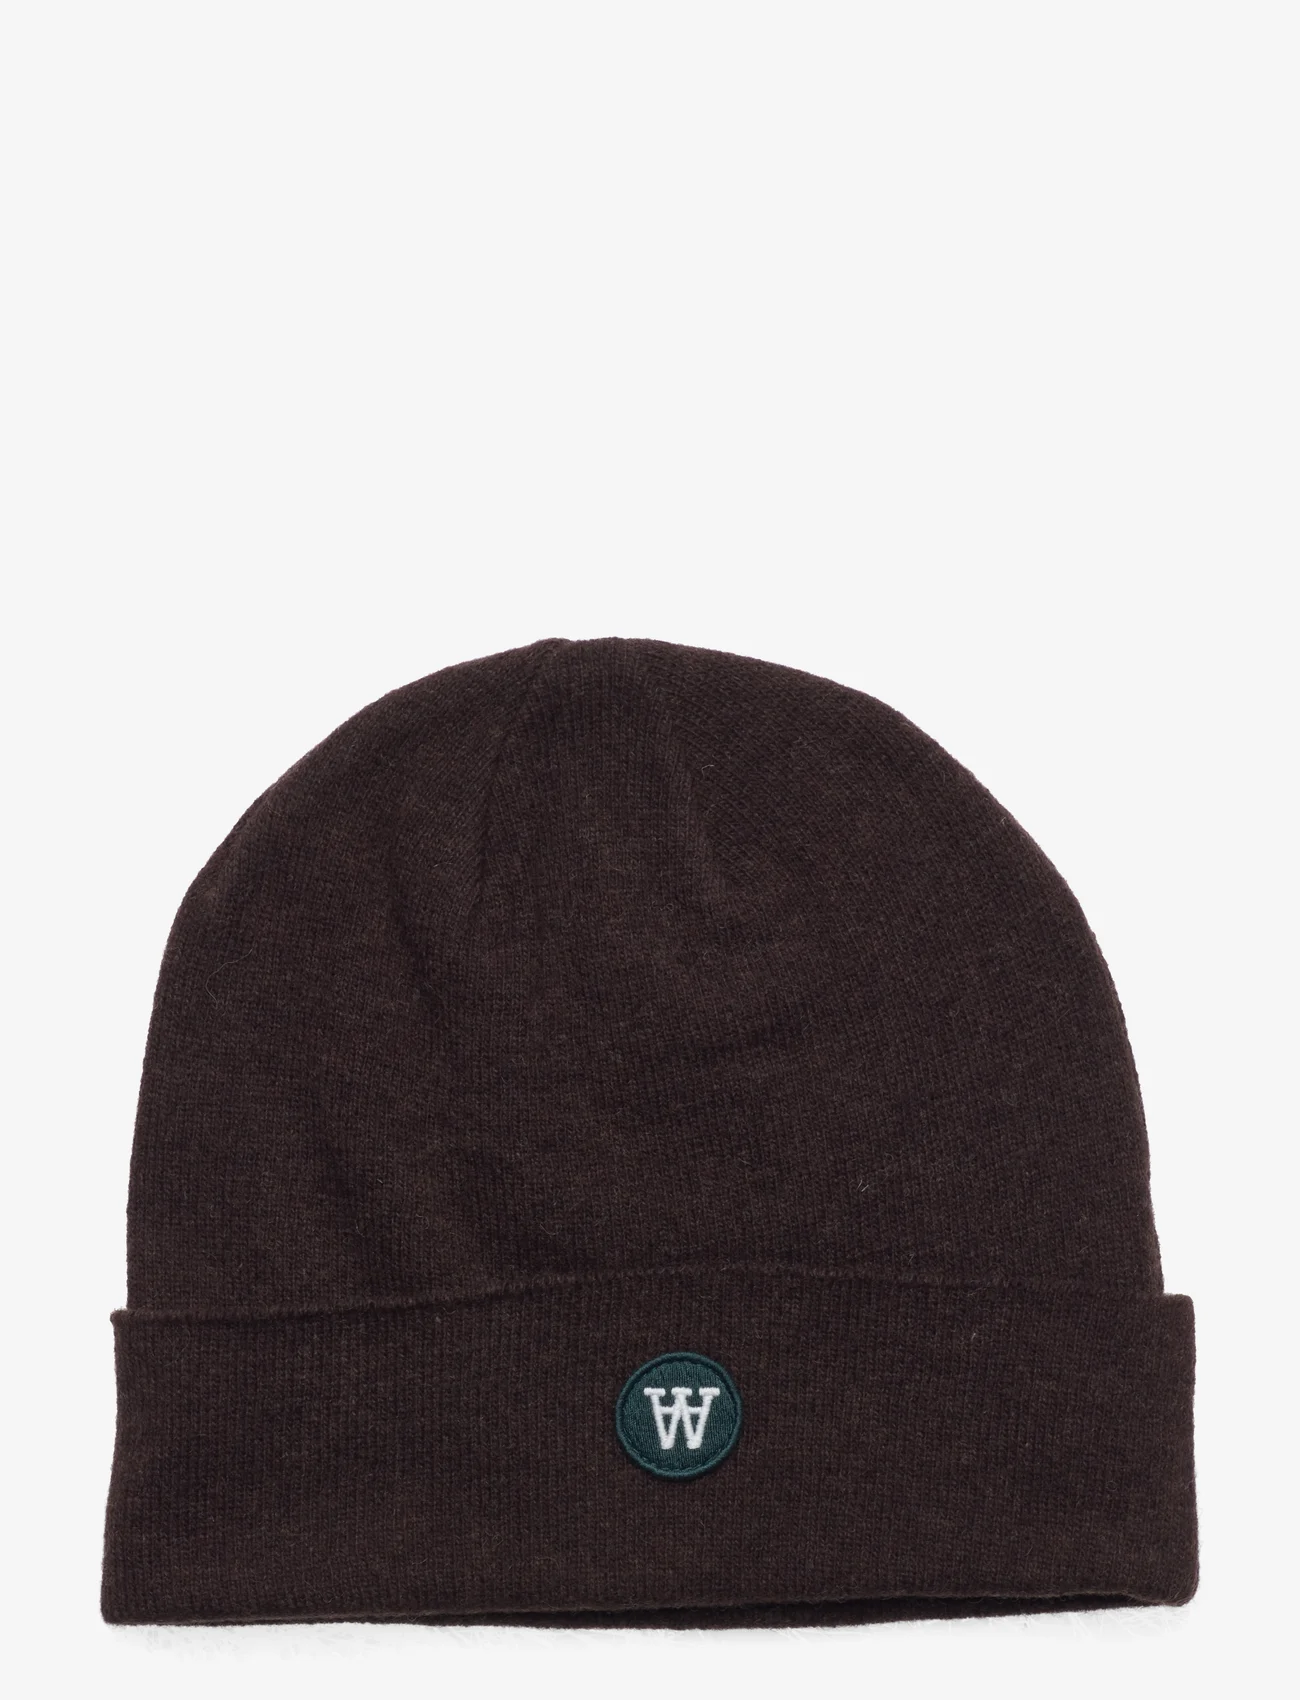 Double A by Wood Wood - Vin patch beanie - beanies - black coffee - 0